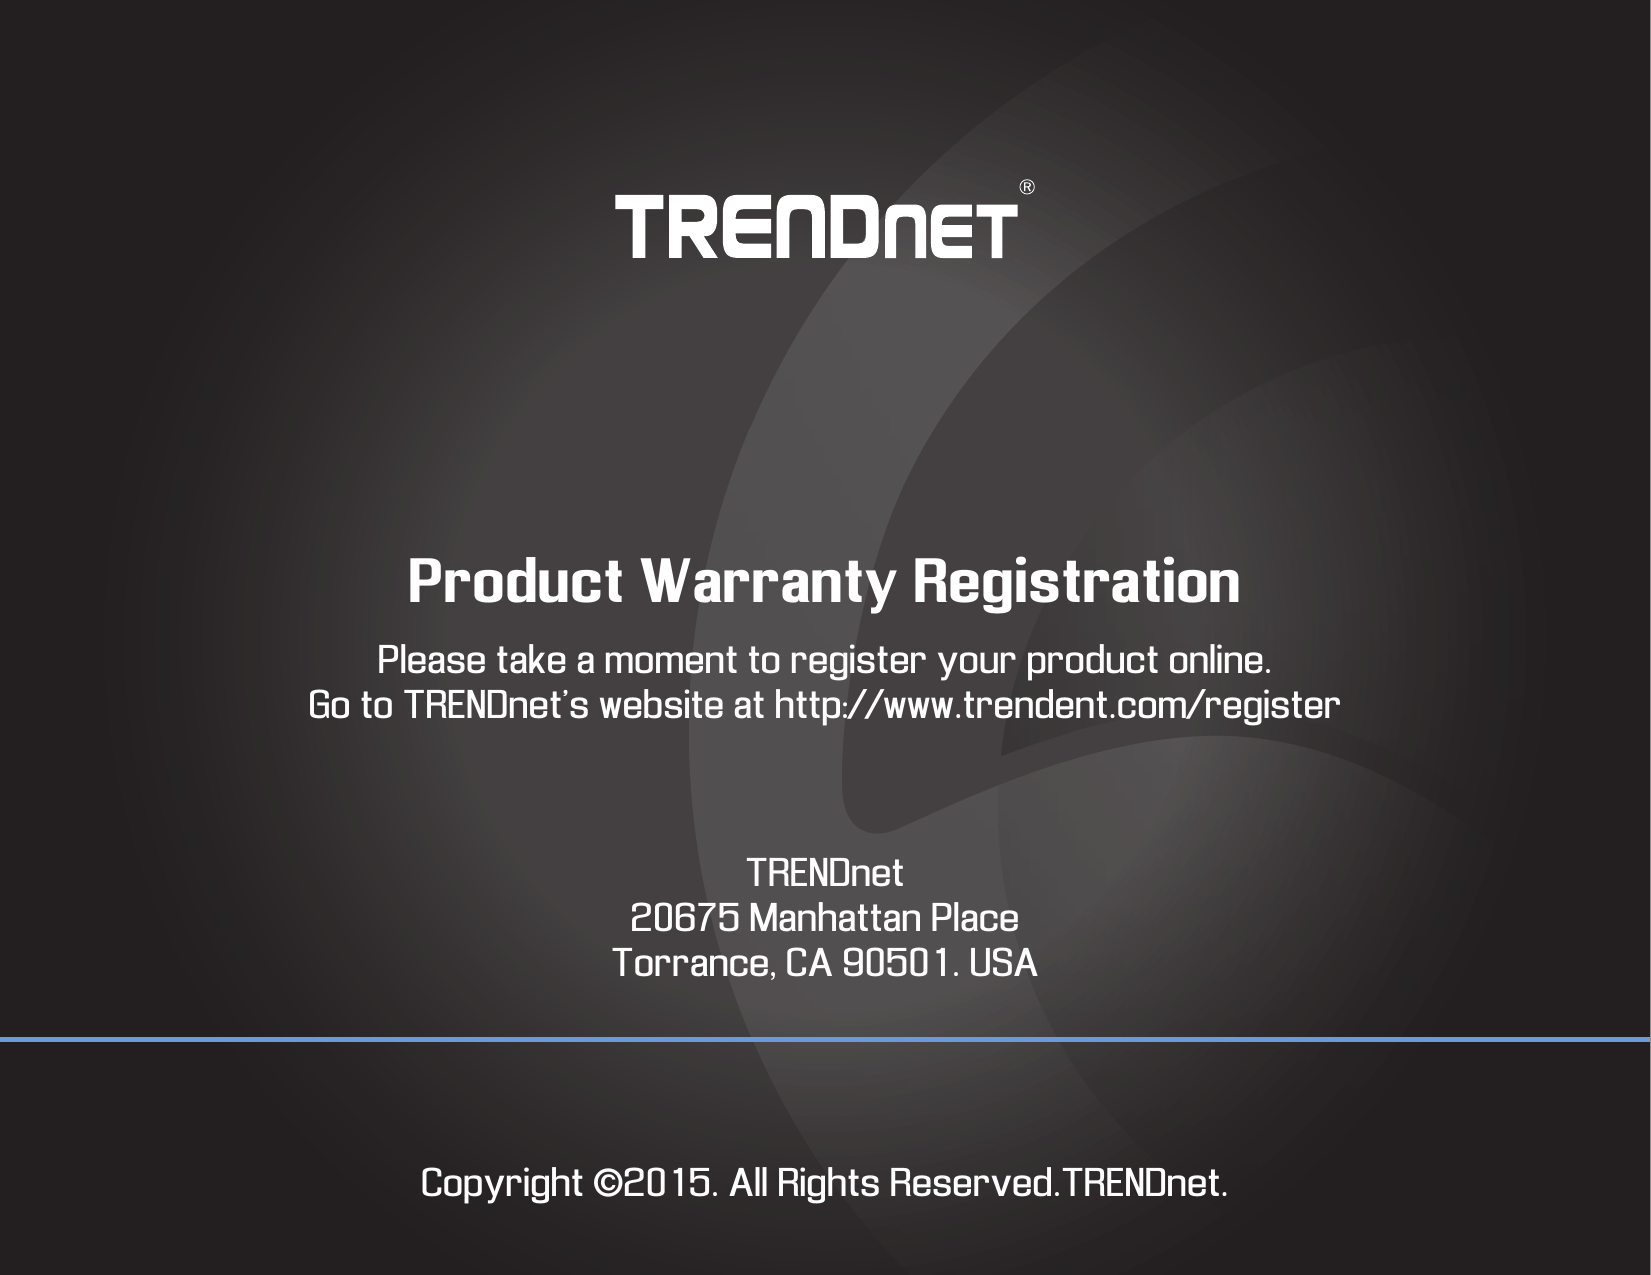 Product Warranty RegistrationPlease take a moment to register your product online.Go to TRENDnet’s website at http://www.trendent.com/registerTRENDnet20675 Manhattan PlaceTorrance, CA 90501. USACopyright ©2015. All Rights Reserved.TRENDnet.